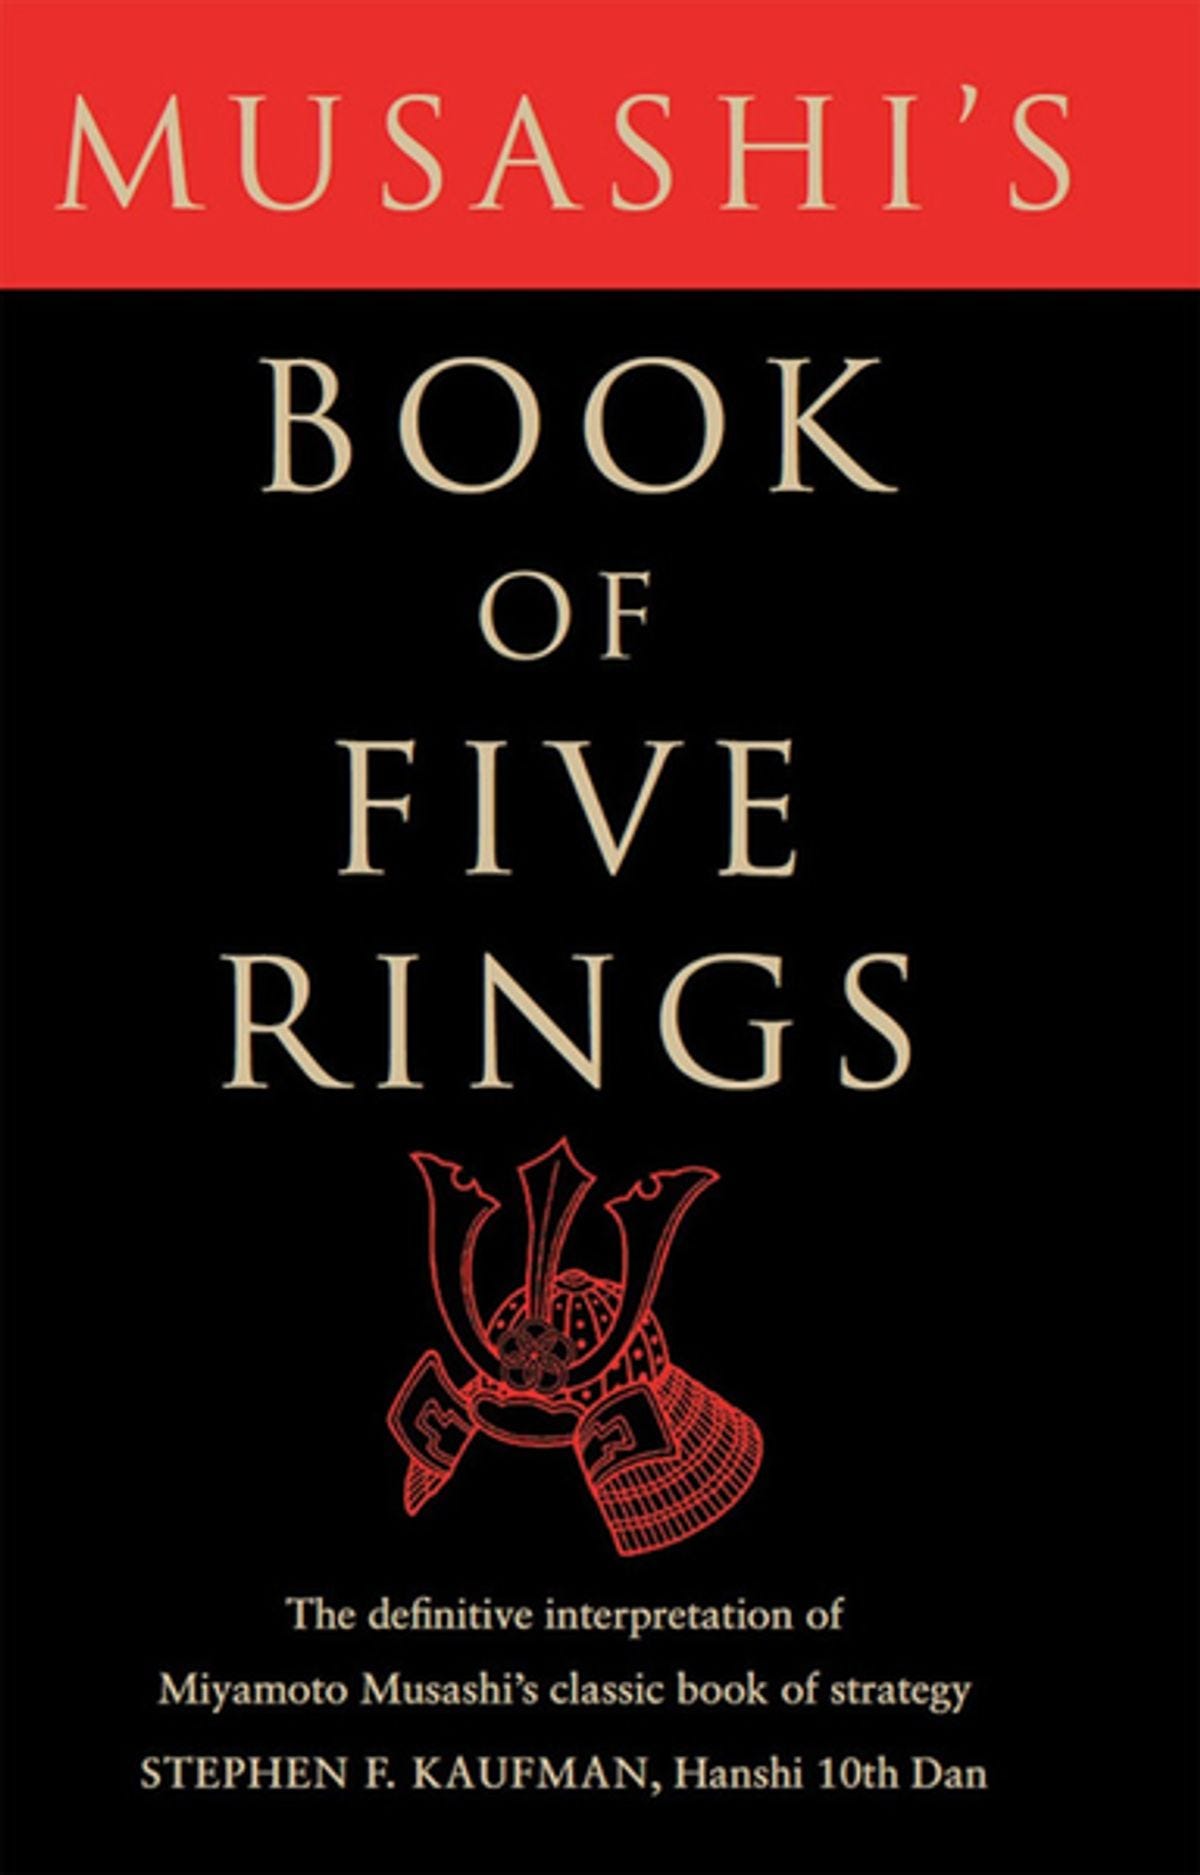 The Book Of Five Rings. “Do nothing that is of no use.” | by Wesley Donehue  | Medium